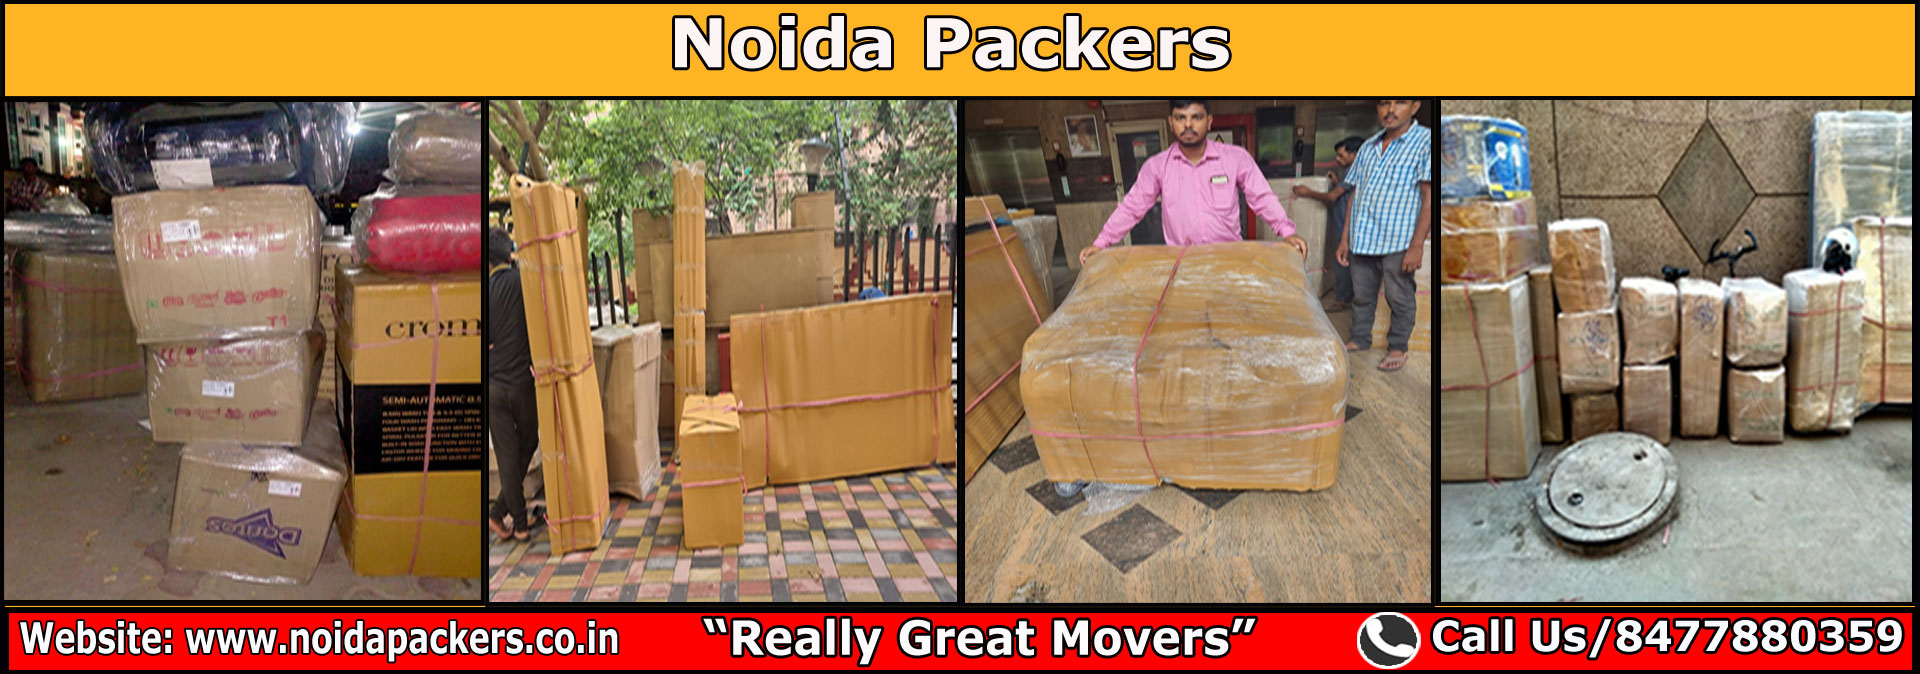 Movers ande Packers Noida Sector 99